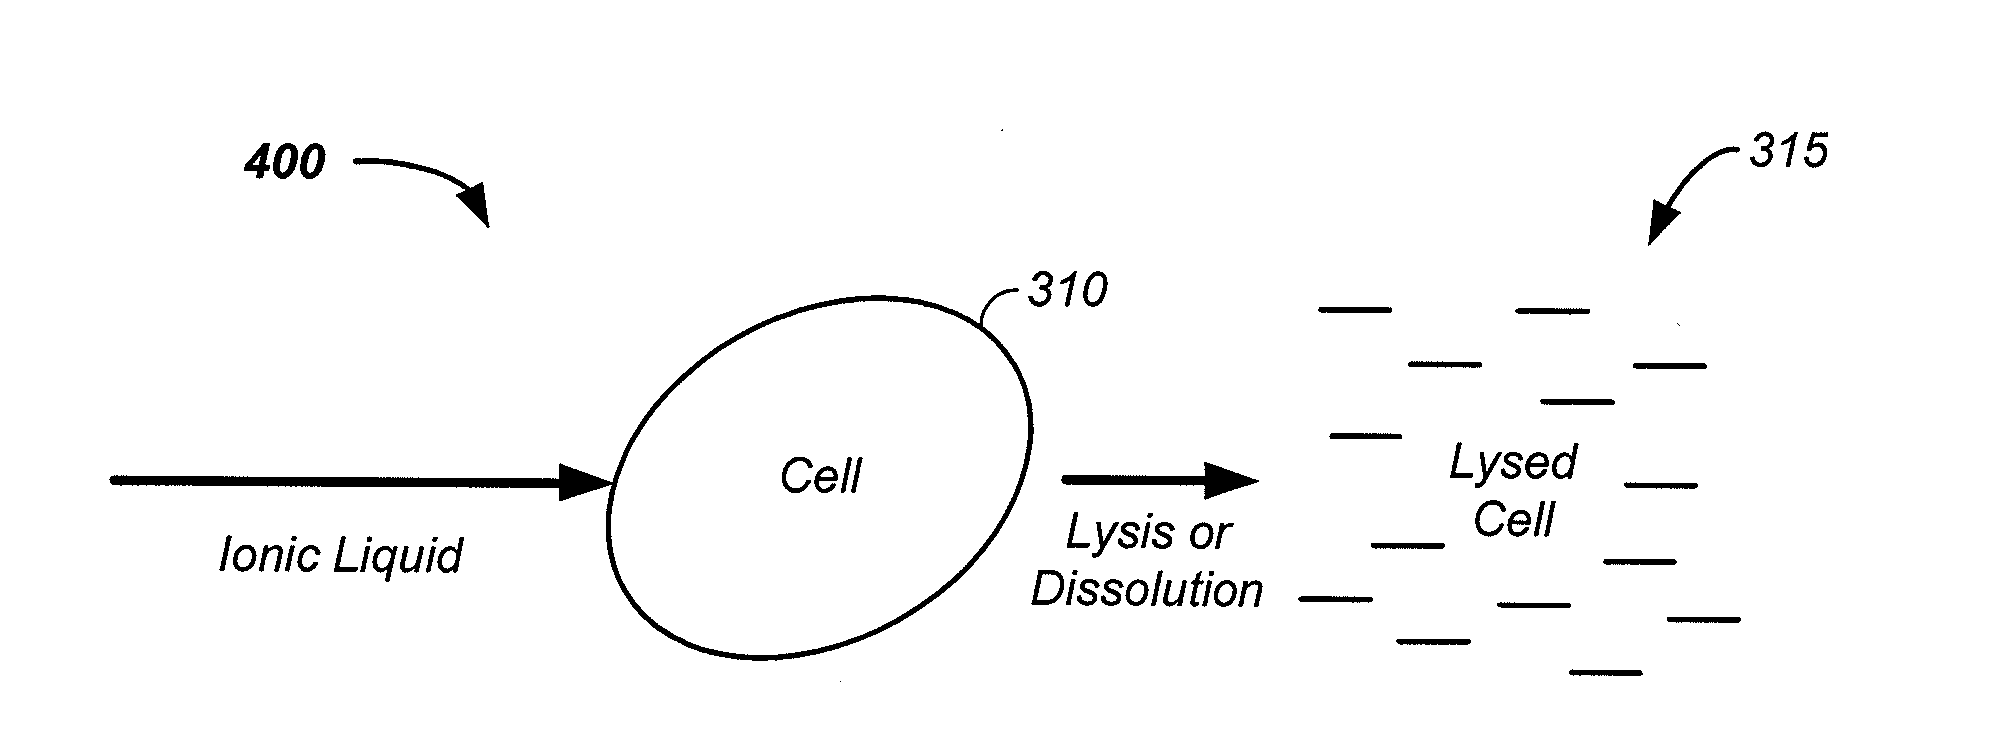 Method and Apparatus Using an Active Ionic Liquid for Algae Biofuel Harvest and Extraction